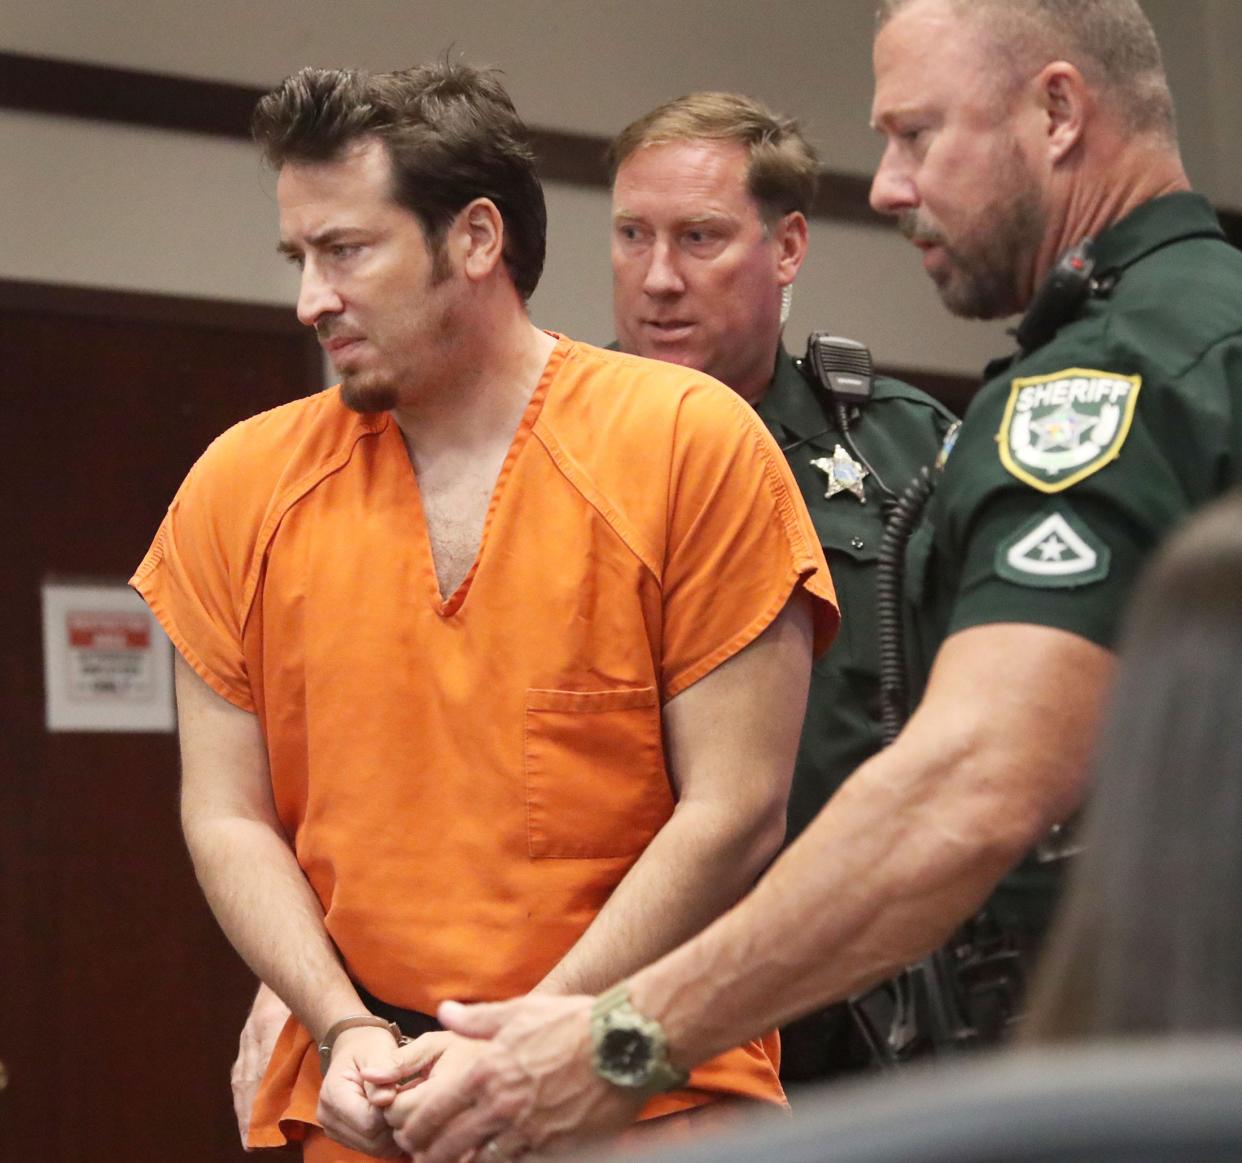 Arin Hankerd, the former Atlantic High School teacher and coach charged with sexual offenses involving students, is escorted to the defense table, Wednesday, May 24, 2023, during a hearing at the S. James Foxman Justice Center in Daytona Beach.